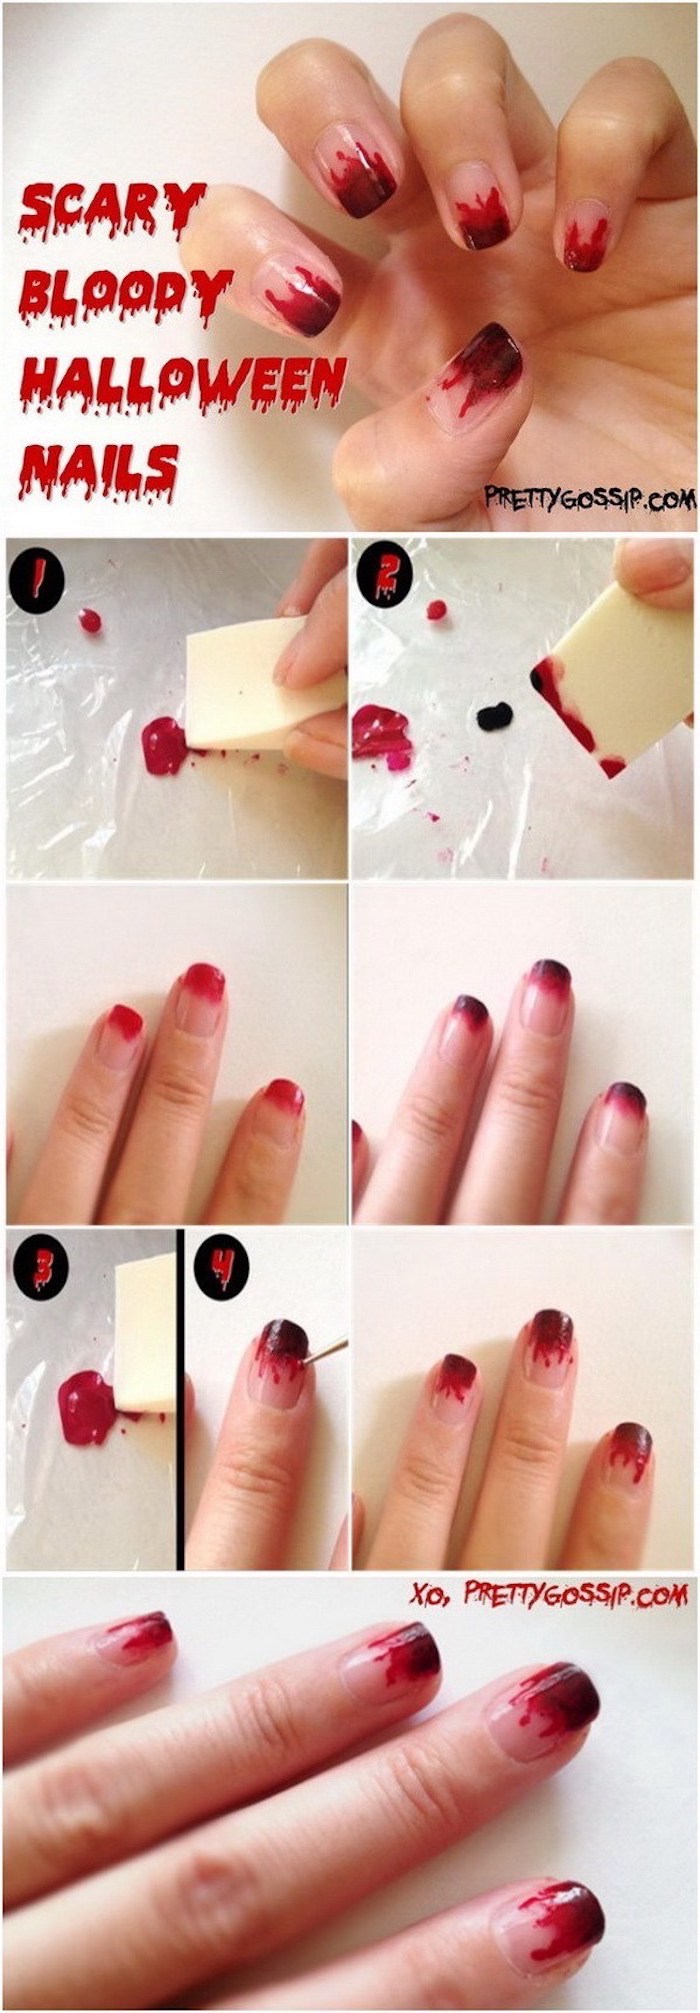 scary bloody halloween nails, step by step, diy tutorial, candy corn nails, red nail polish